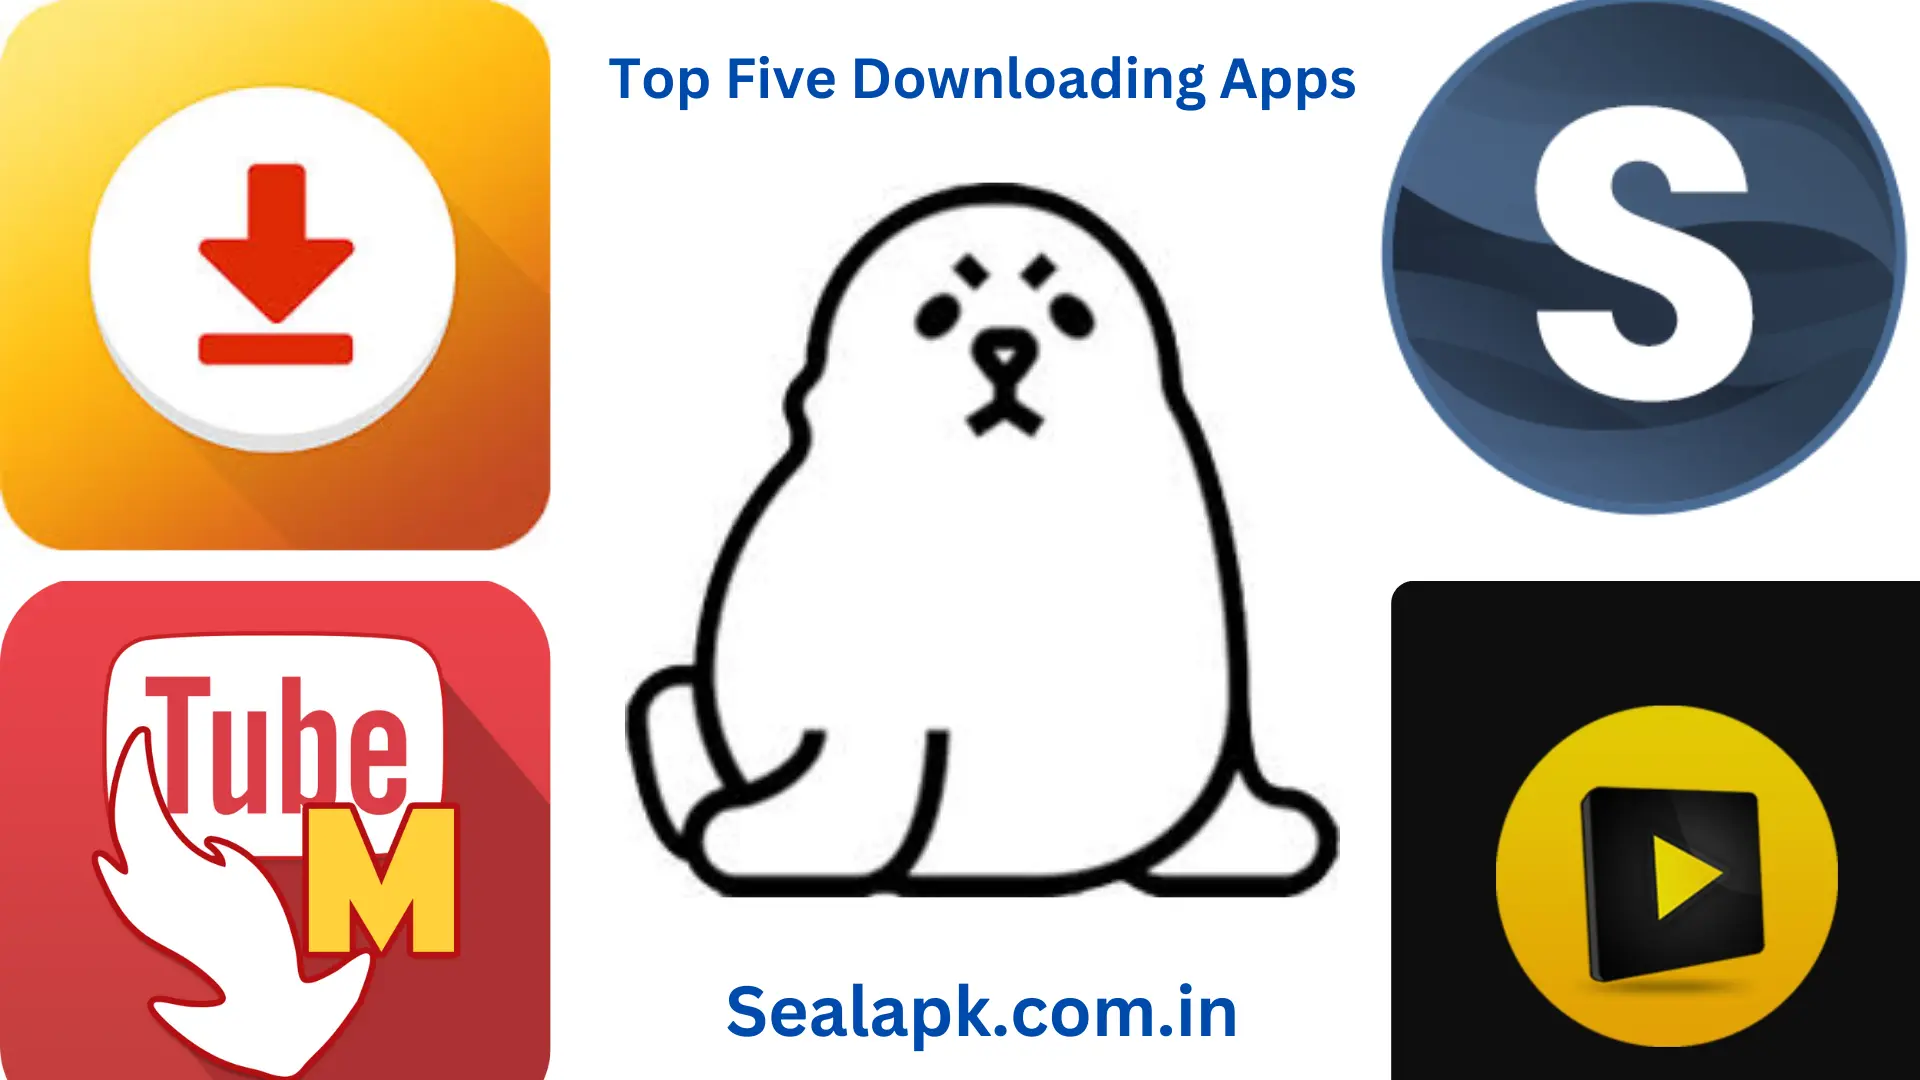 Top Five Downloading Apps with Seal